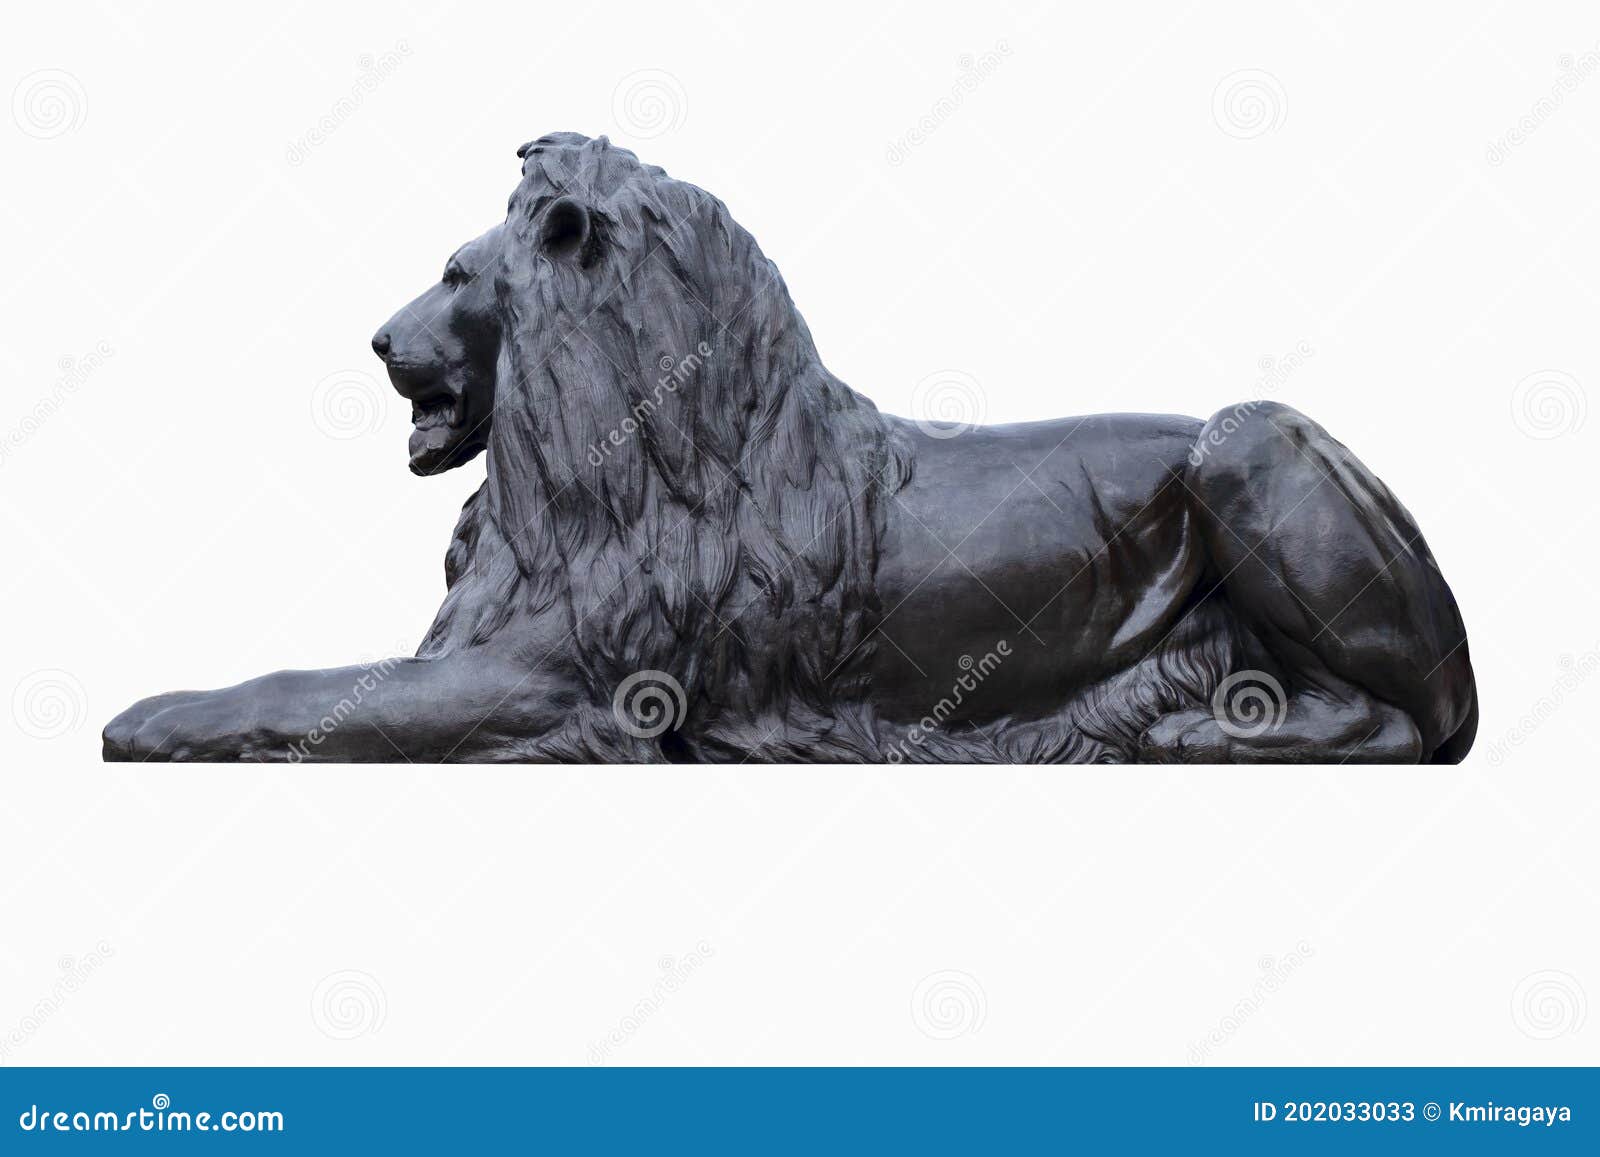 statue of a lion at trafalgar square in london  on white